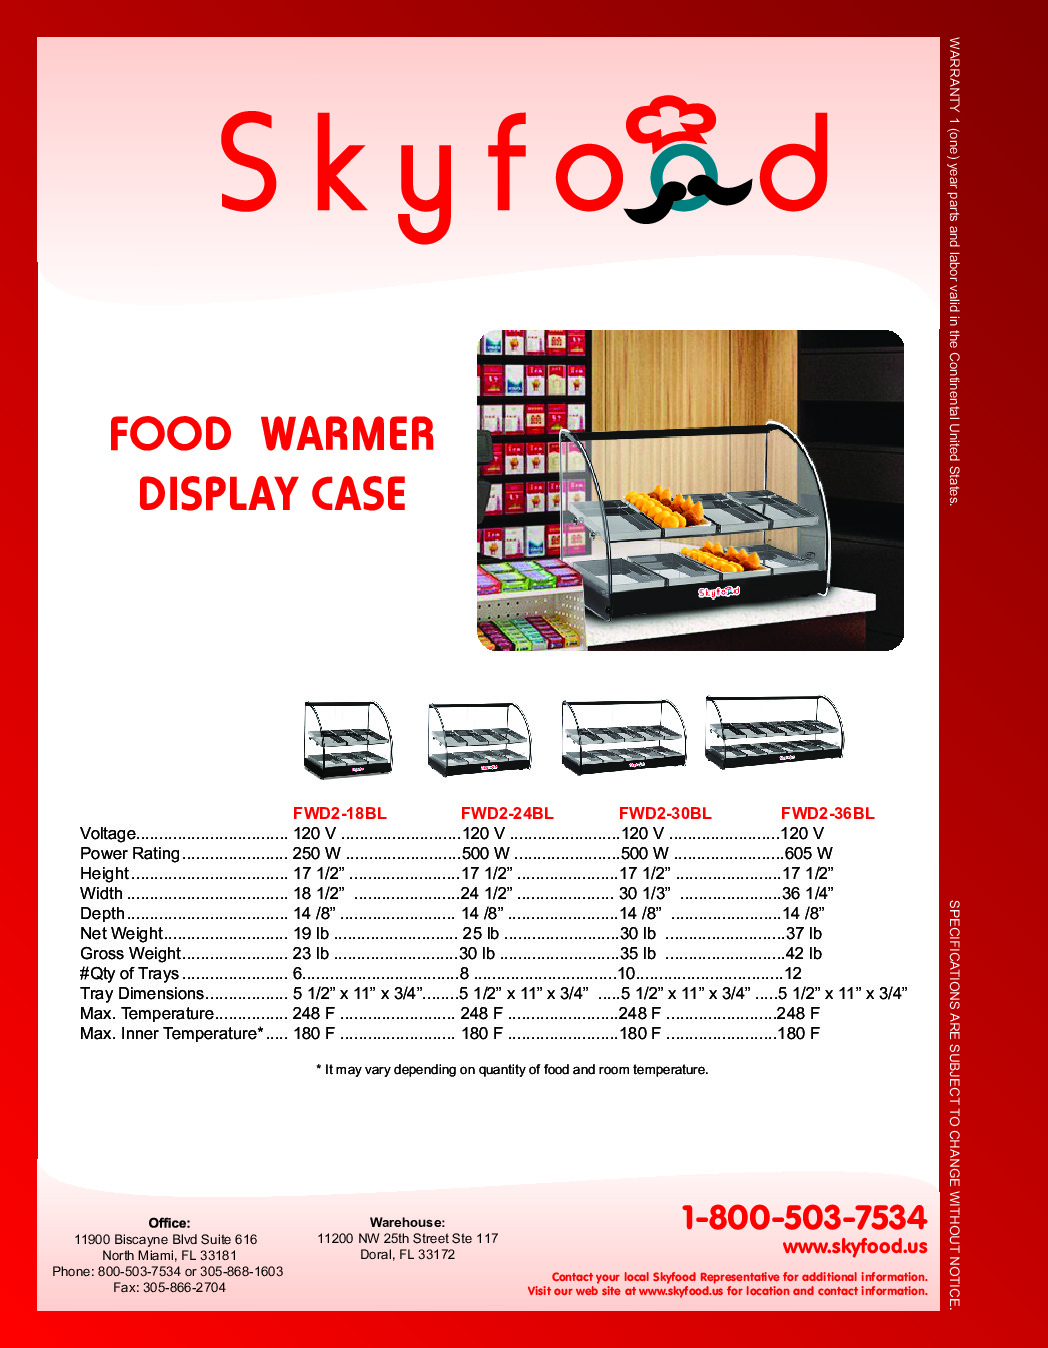 Skyfood FWD2-18BL Countertop Heated Deli Display Case